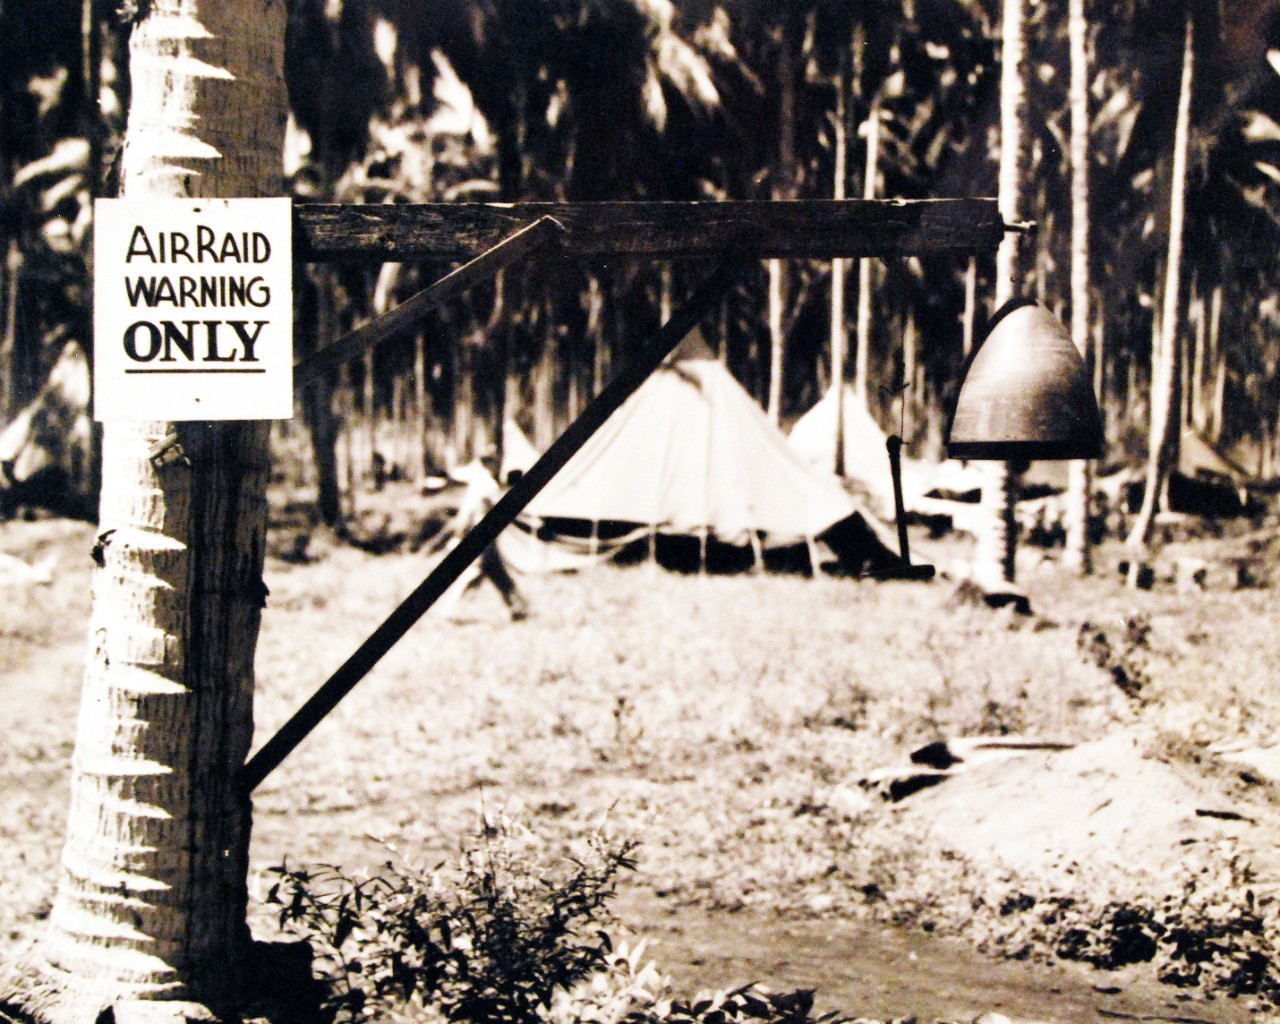 80-G-43756:  Guadalcanal, Solomon Islands.   The former nose piece of an enemy 14” shell which feel on Henderson Field, Guadalcanal, during a bombardment, is used as an alarm gong against raids.  Photograph released November 16, 1943.   Official U.S. Navy Photograph, now in the collections of the National Archives.    (2015/10/13).